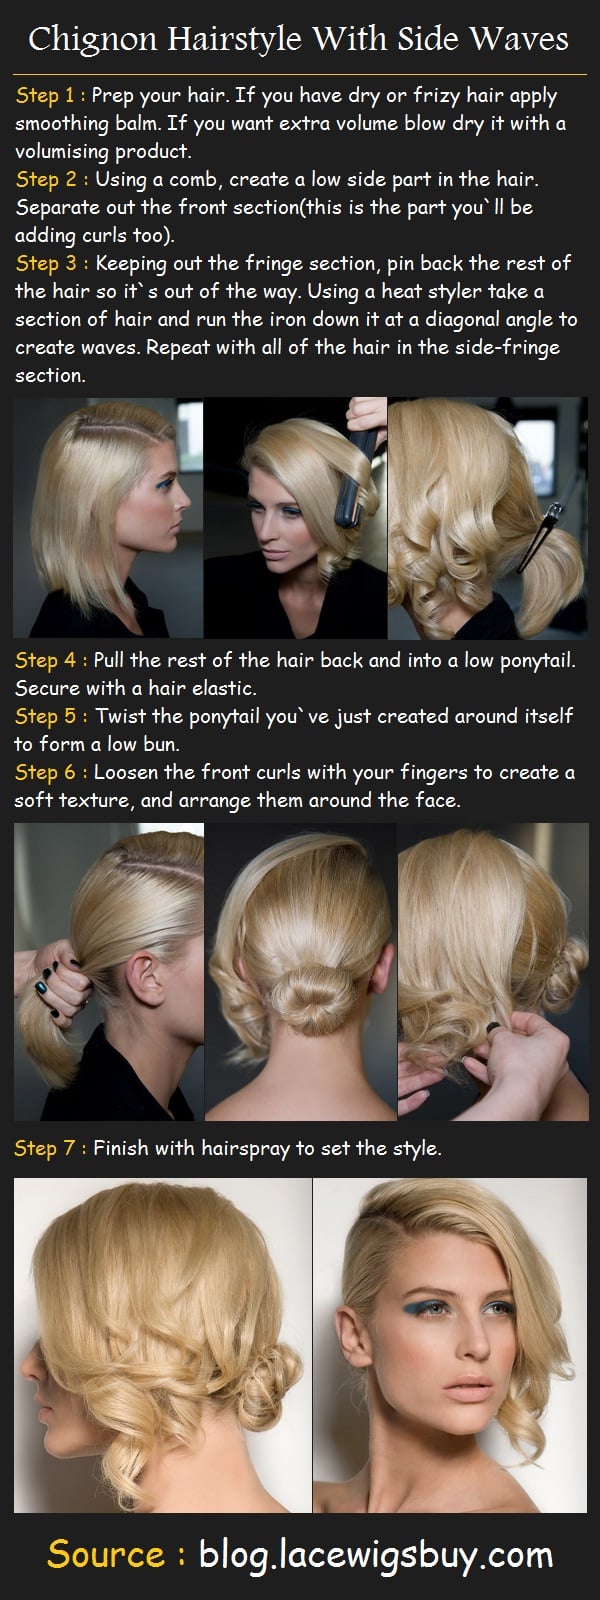 18 Great Ideas and Tutorials for Sophisticated Hairstyle (5)